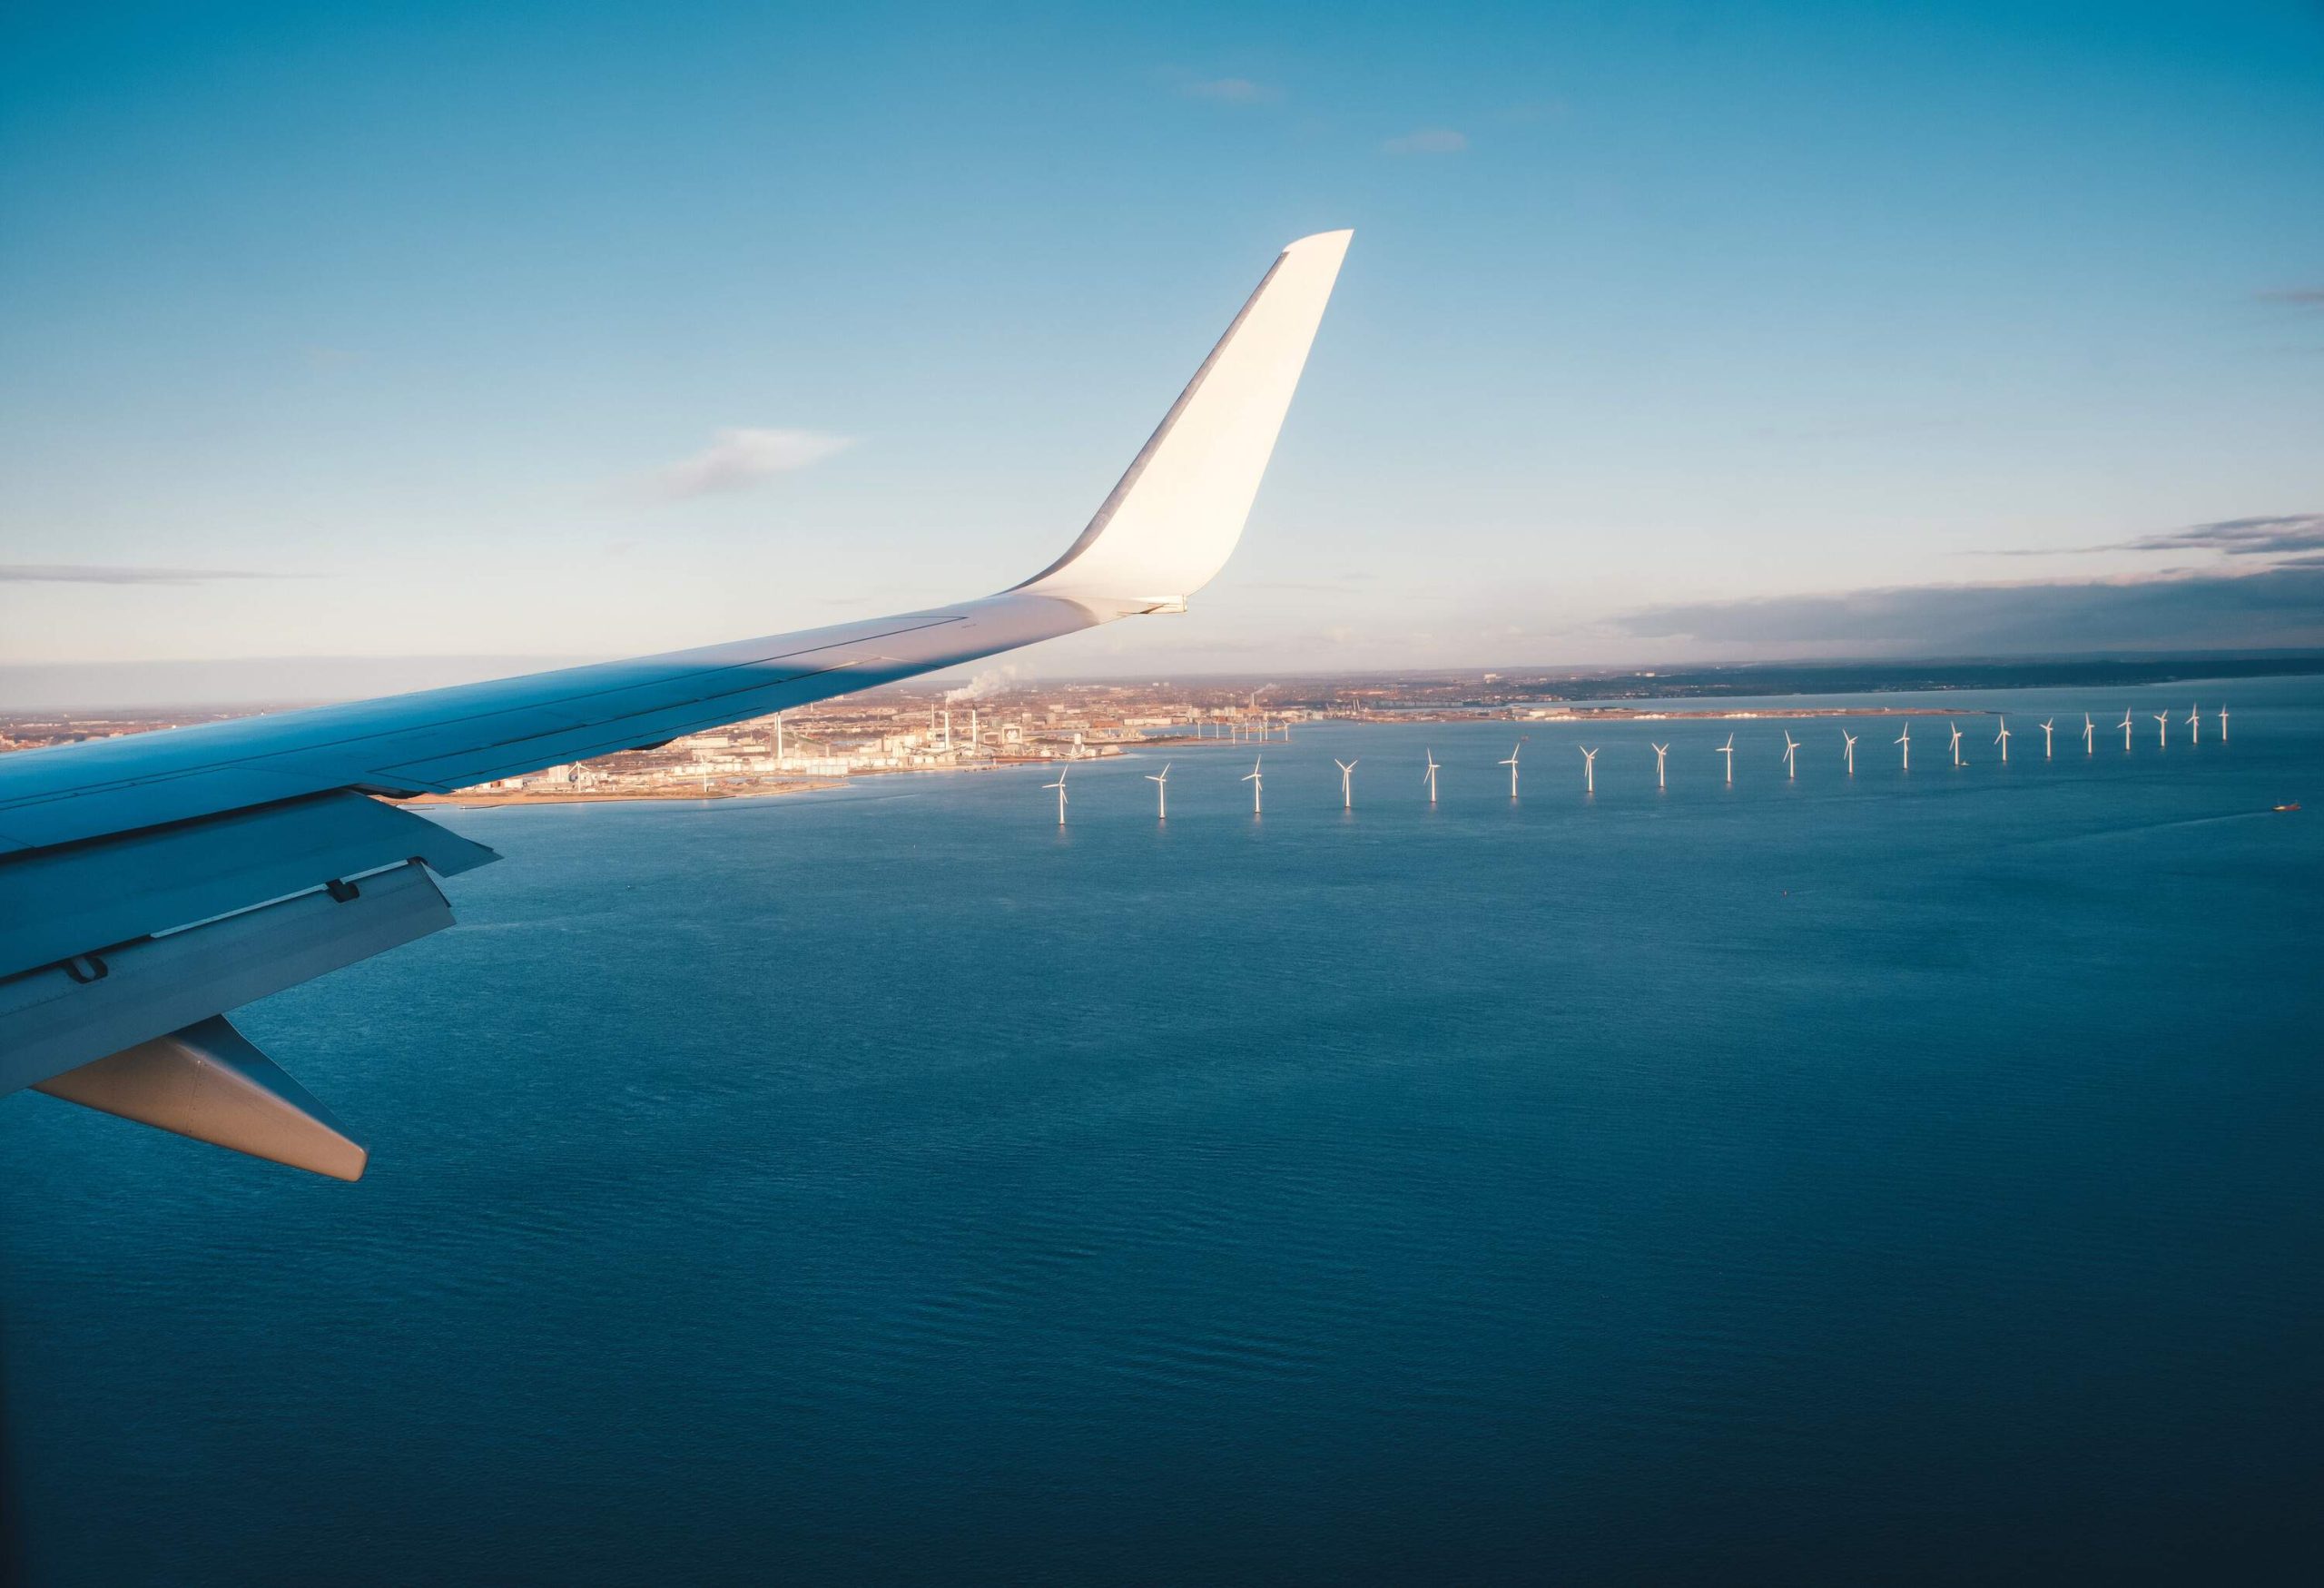 A plane's wing overlooks a sea, including a row of offshore wind turbines.